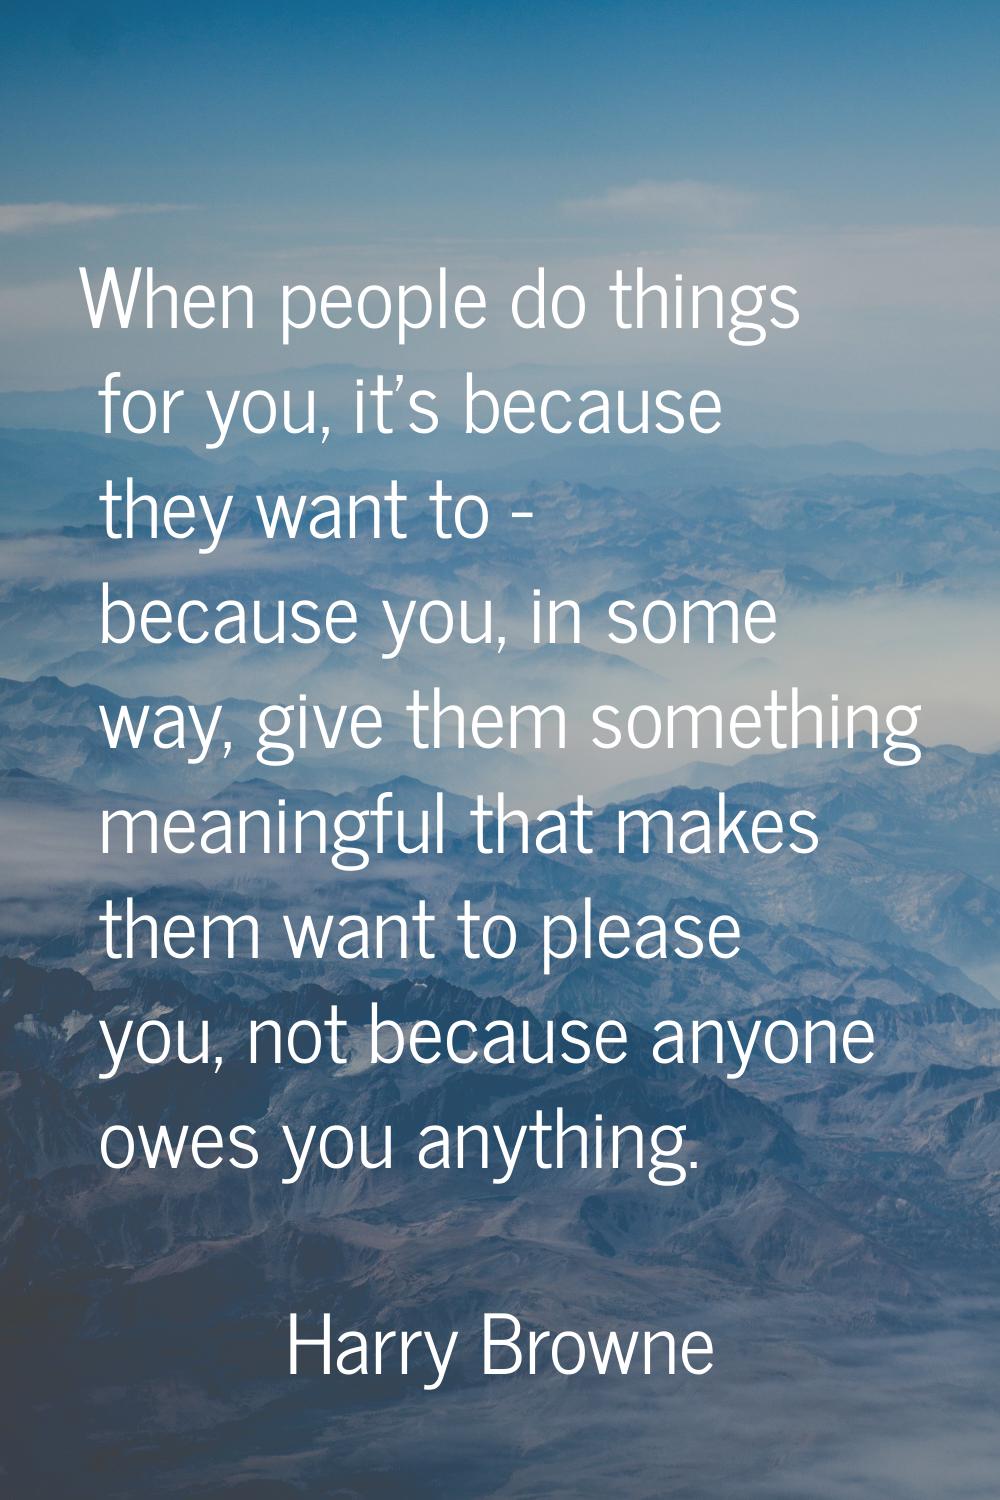 When people do things for you, it's because they want to - because you, in some way, give them some